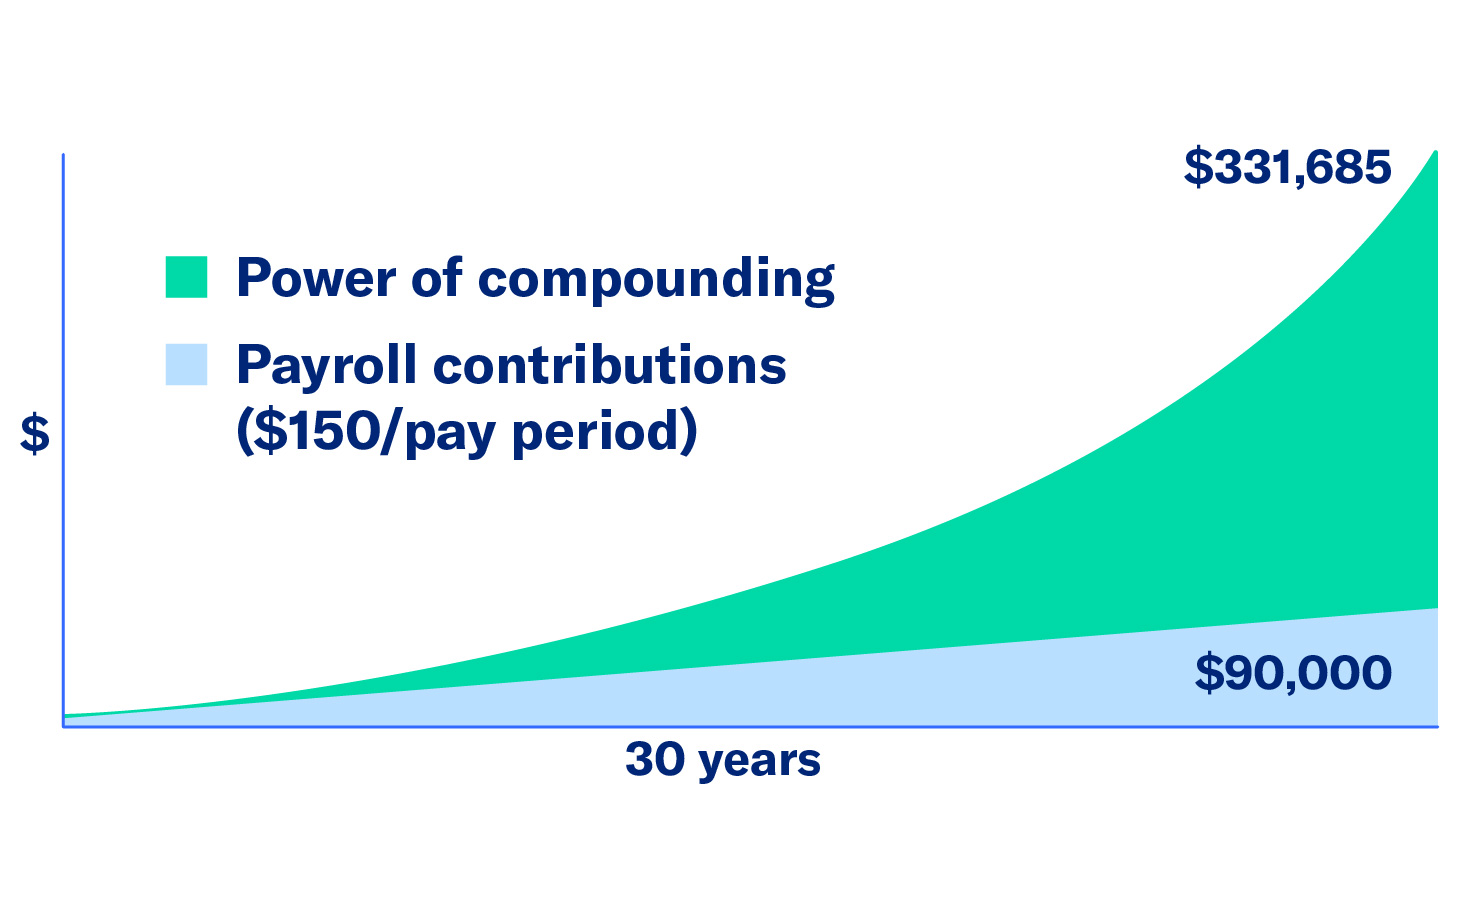 chart showing the power of compounding vs payroll contributions over 30 years